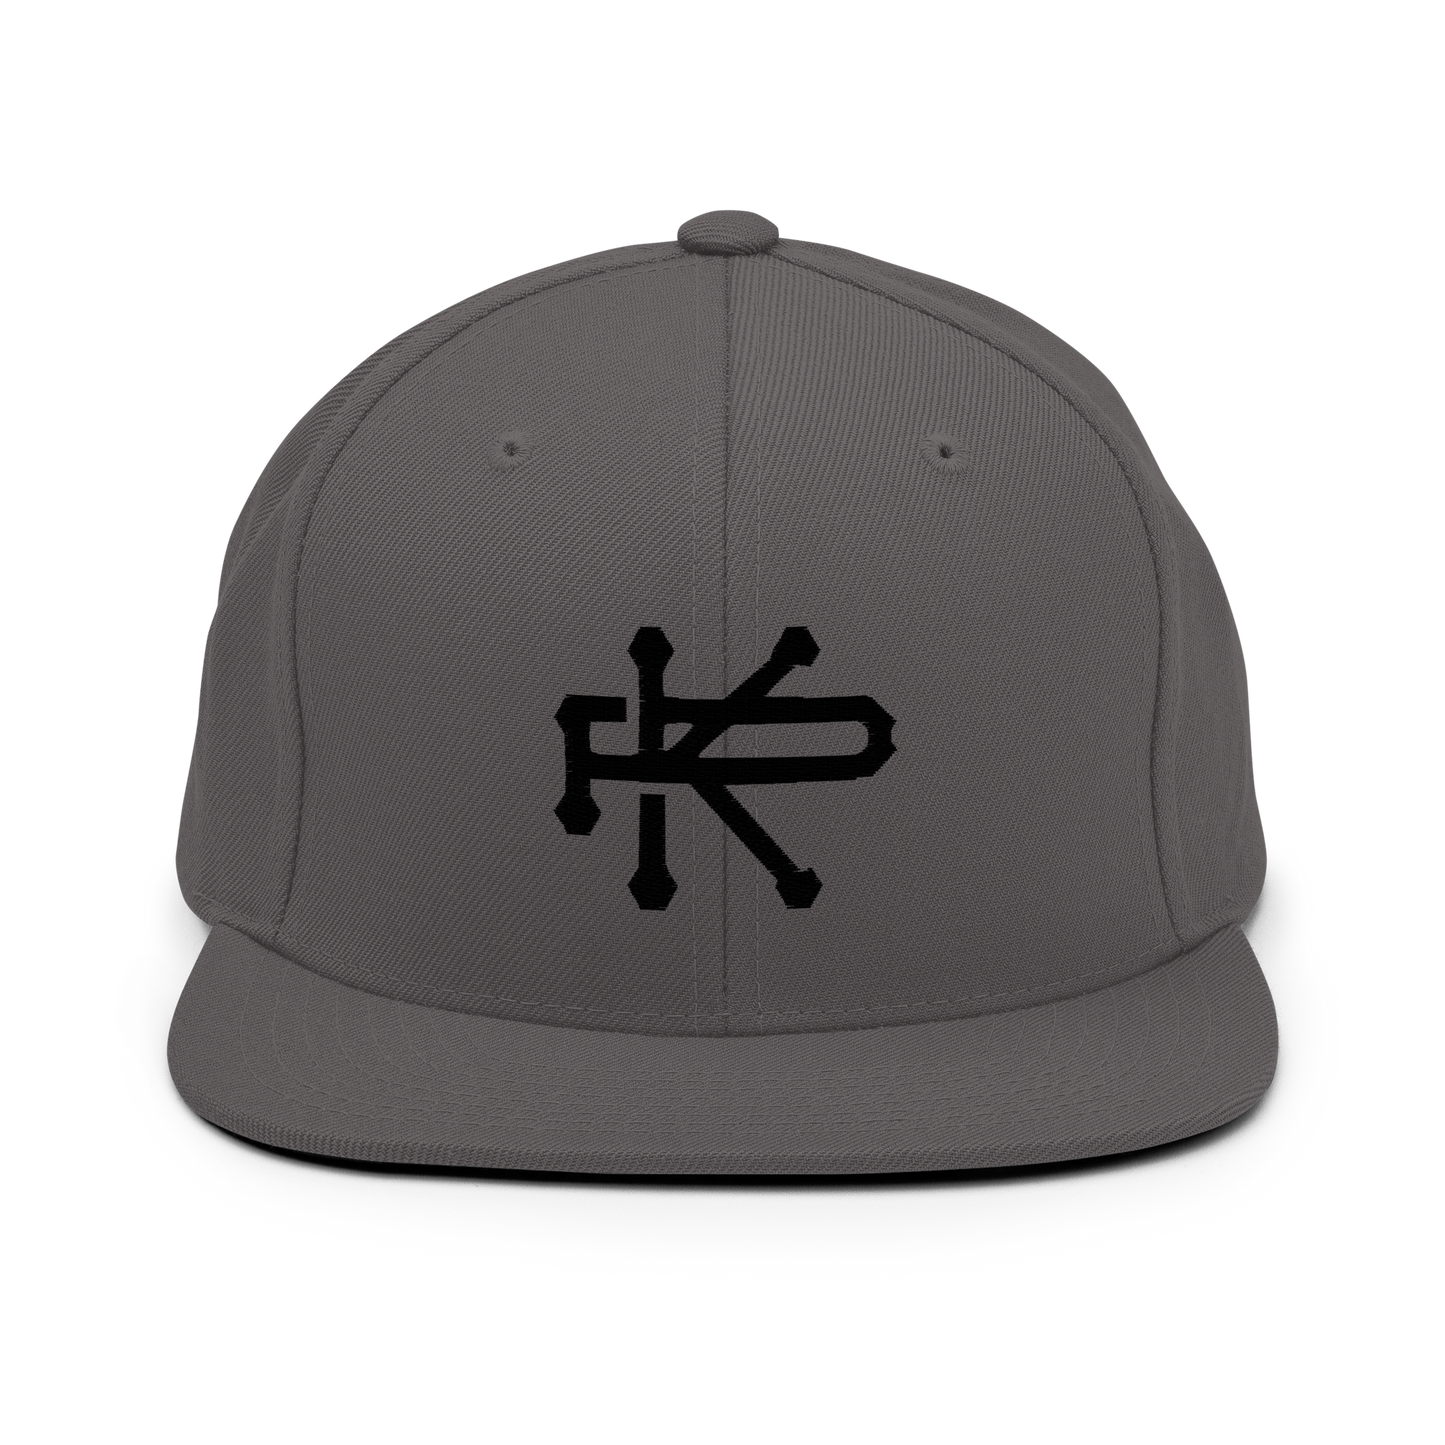 Keen Printing Co. Hat